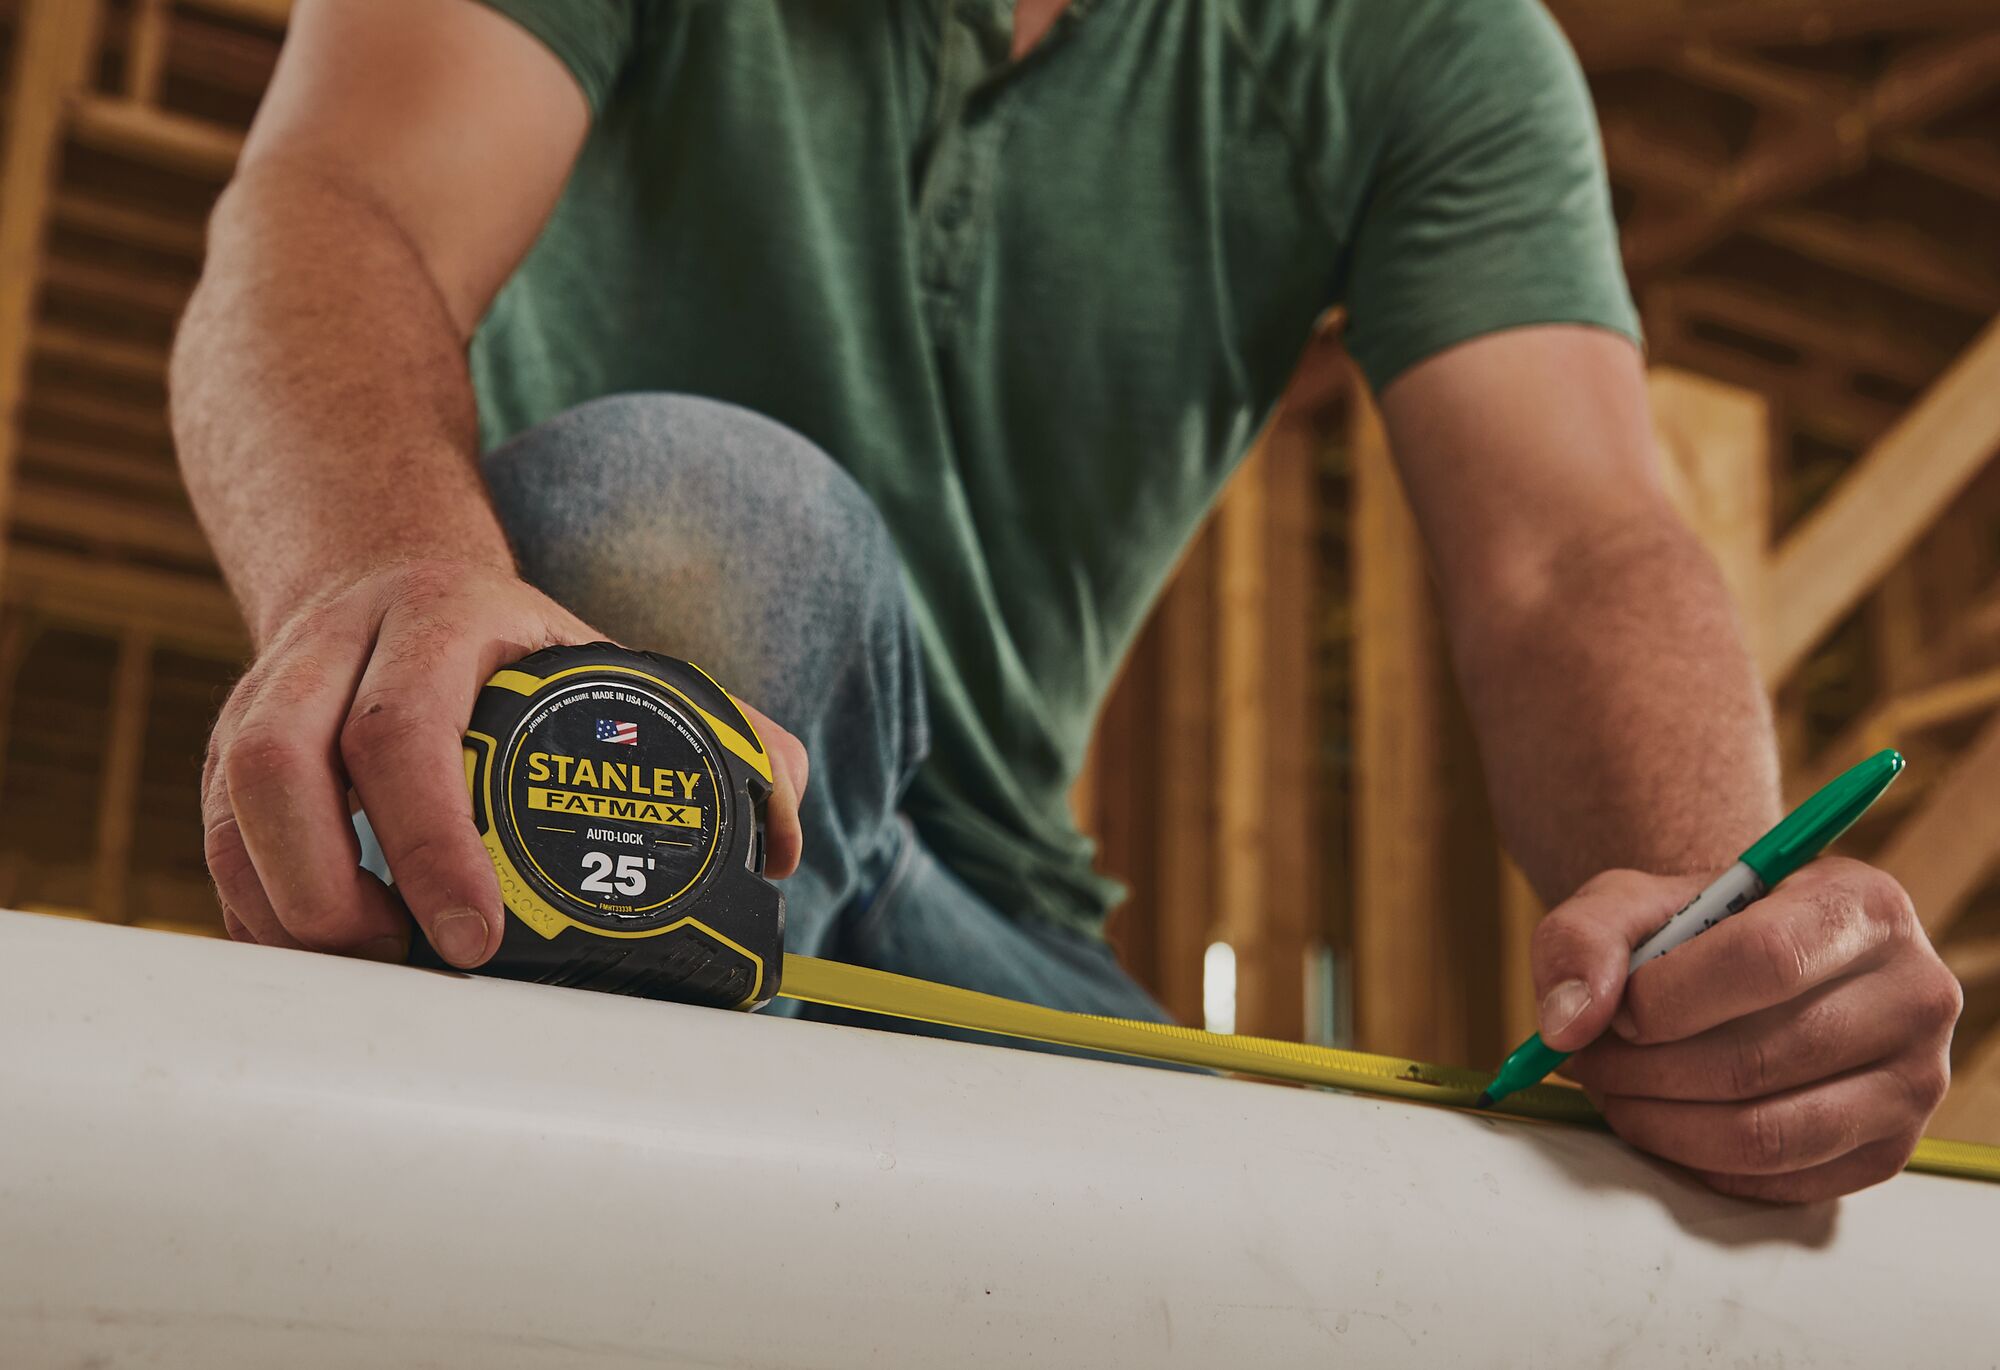 25 feet fatmax auto lock tape being used to measure a wooden table.